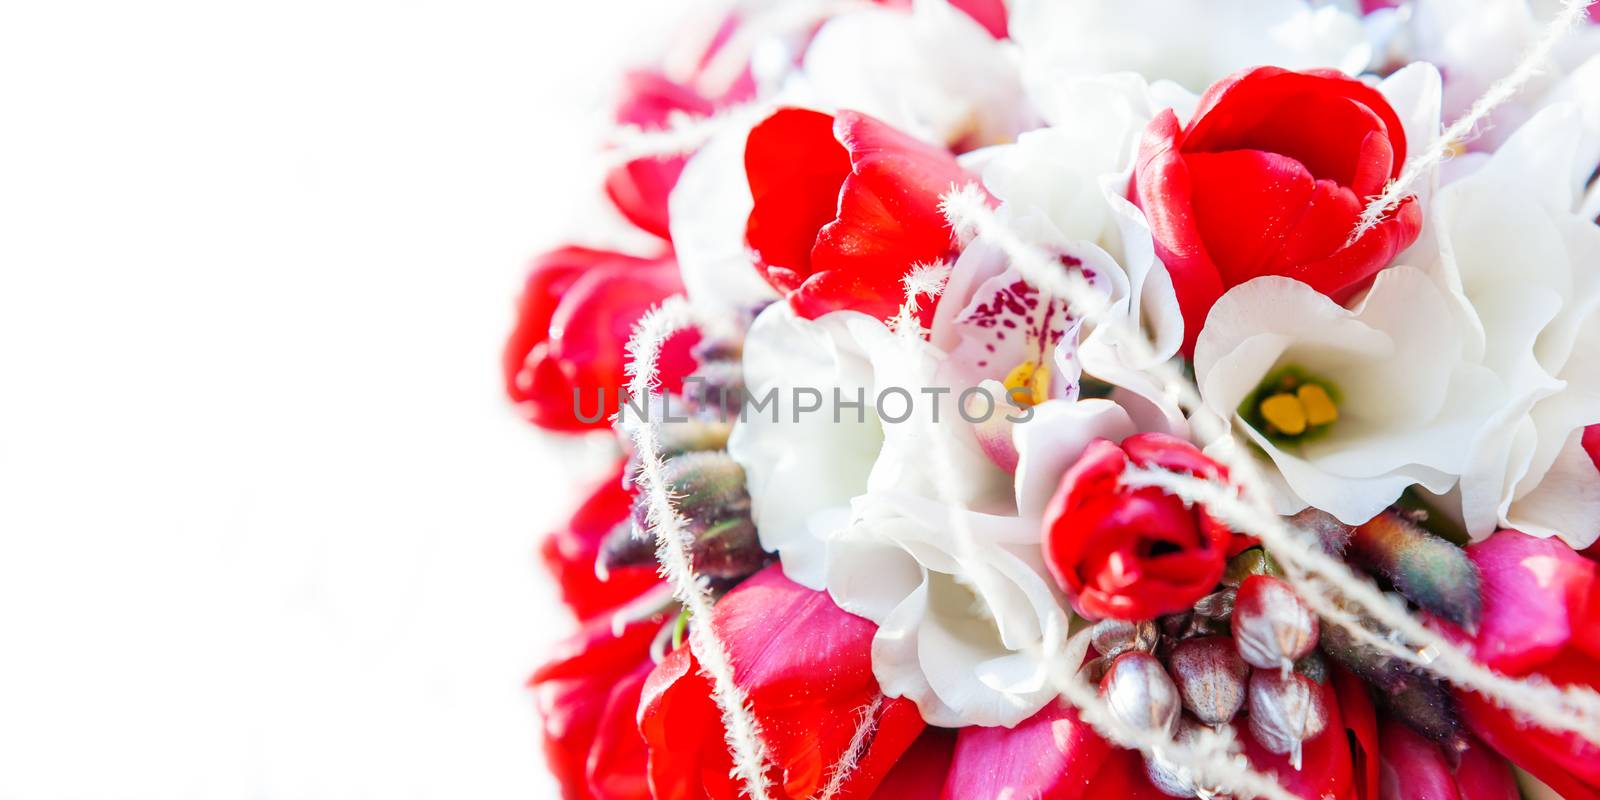 Bridal bouquet on sunlight. Traditional floral composition with bright red tulips. Background with copy space.